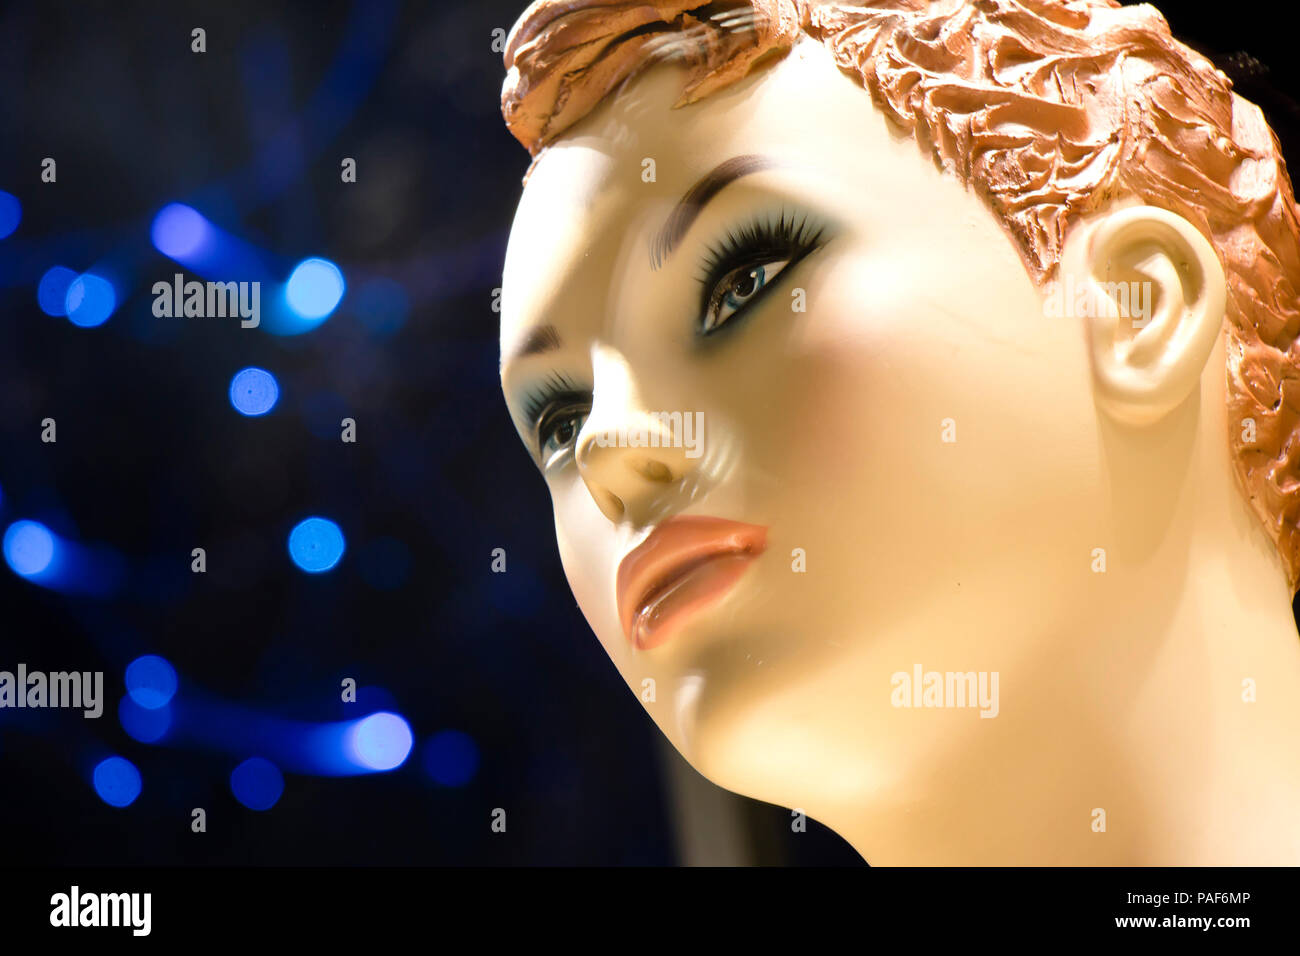 Close up of one female mannequin doll with short curly ginger hair displayed n the shop window with blurred blue lights in the background , profile vi Stock Photo